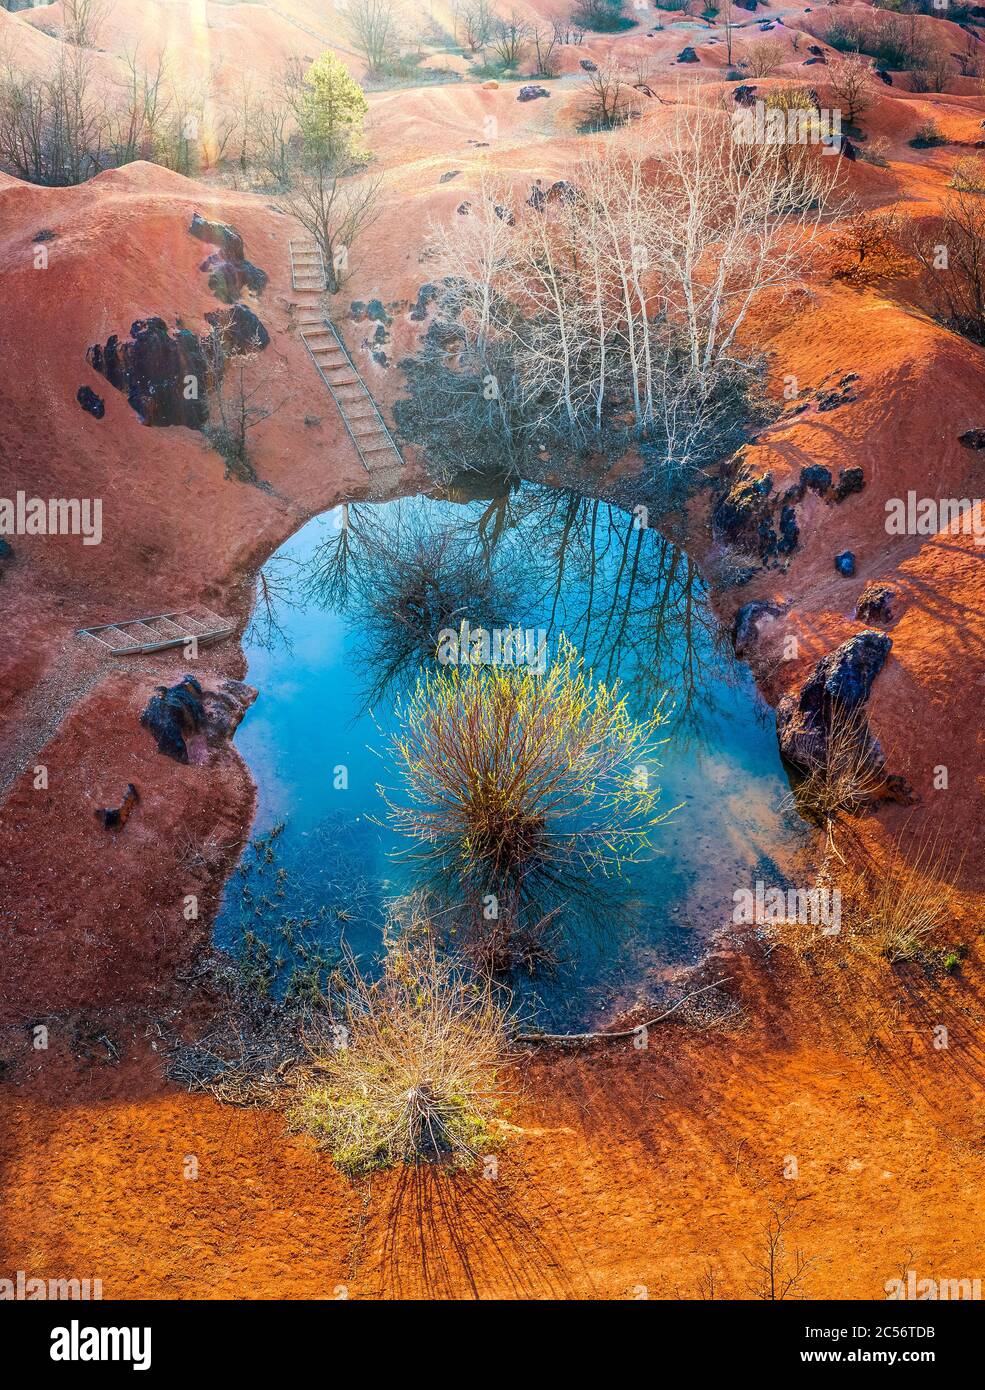 Gant, Hungary - Aerial view of abandoned bauxite mine with small blue lake and warm red and orange colors and tree at sunset Stock Photo